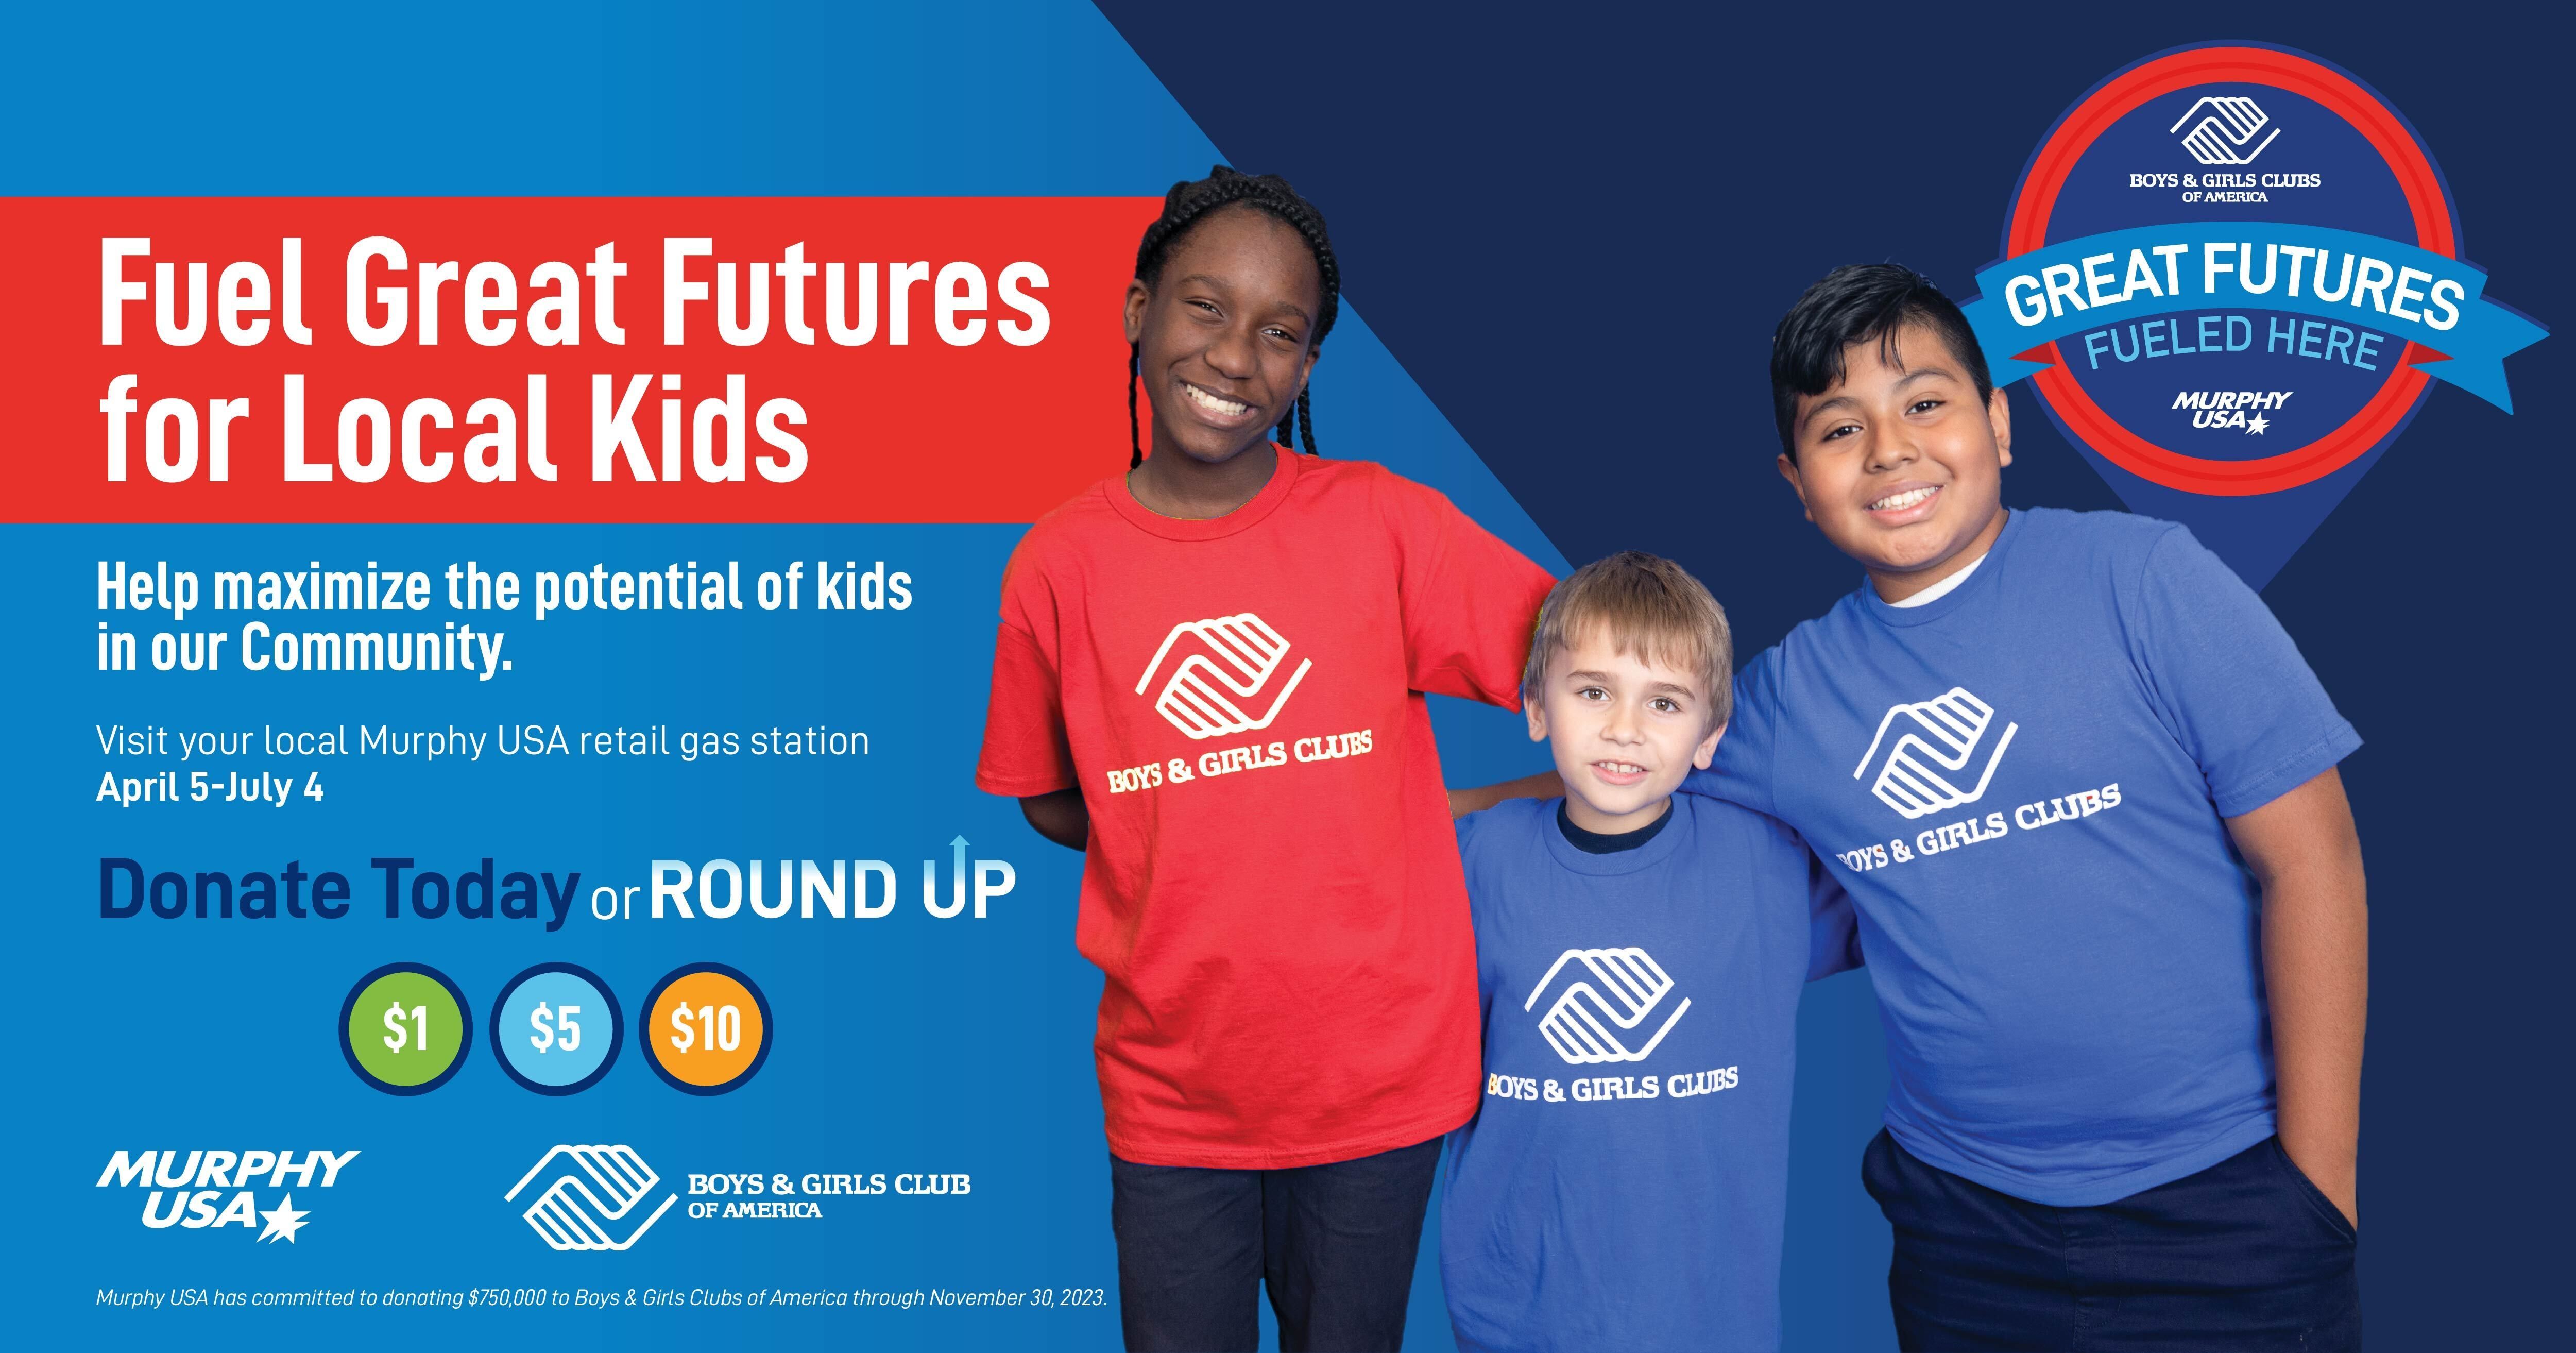 Boys & Girls Club members on Fuel Great Futures Campaign Flyer